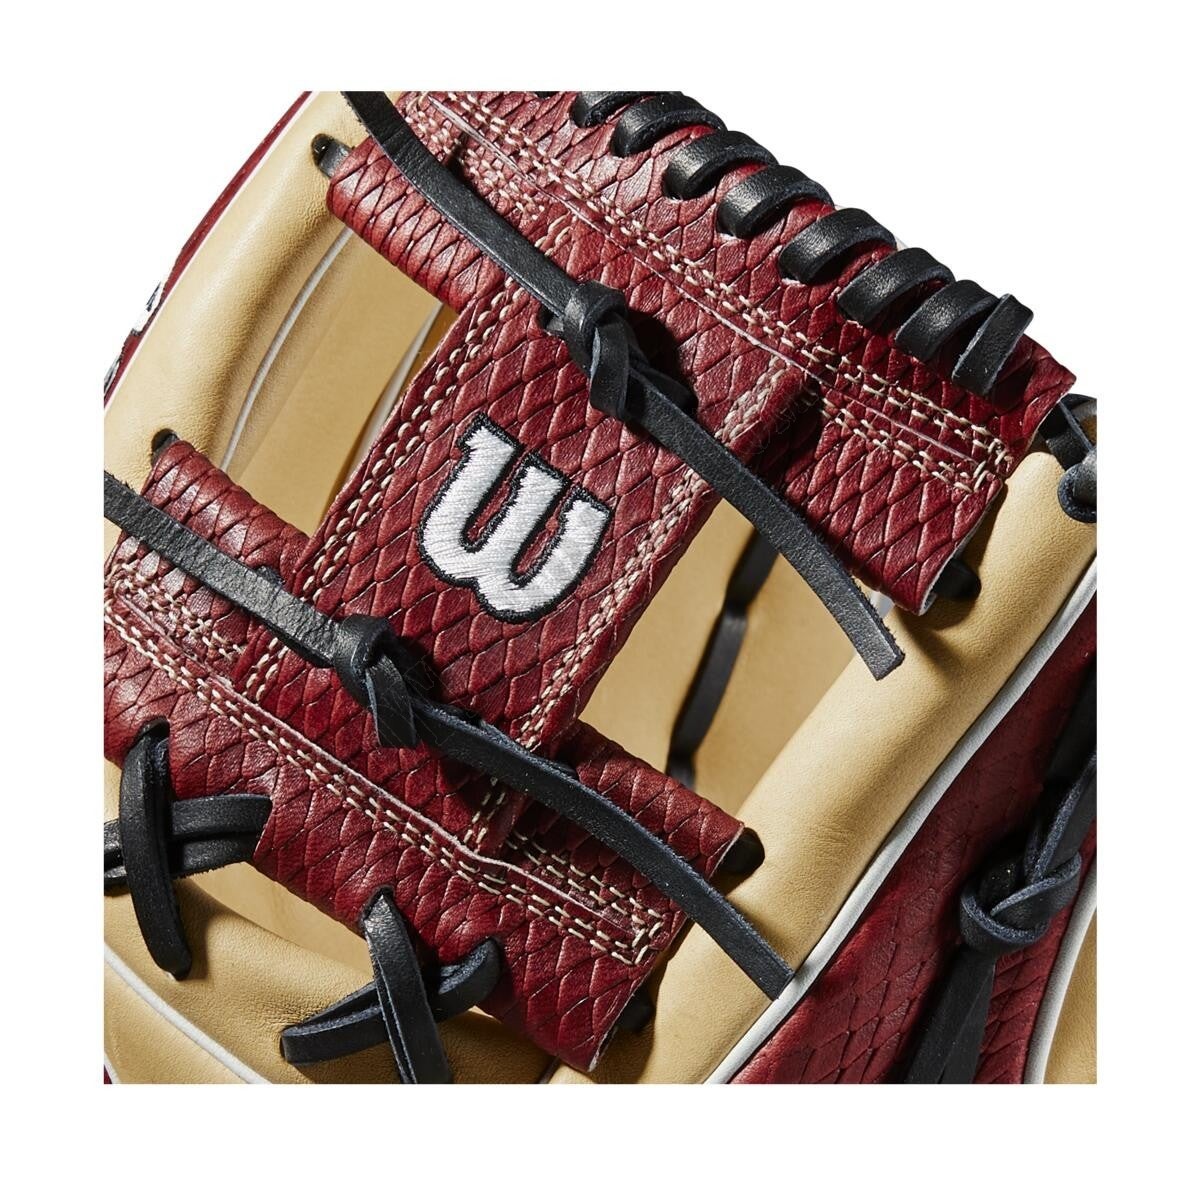 2021 A2K 1786 11.5" Infield Baseball Glove - Limited Edition ● Wilson Promotions - -5